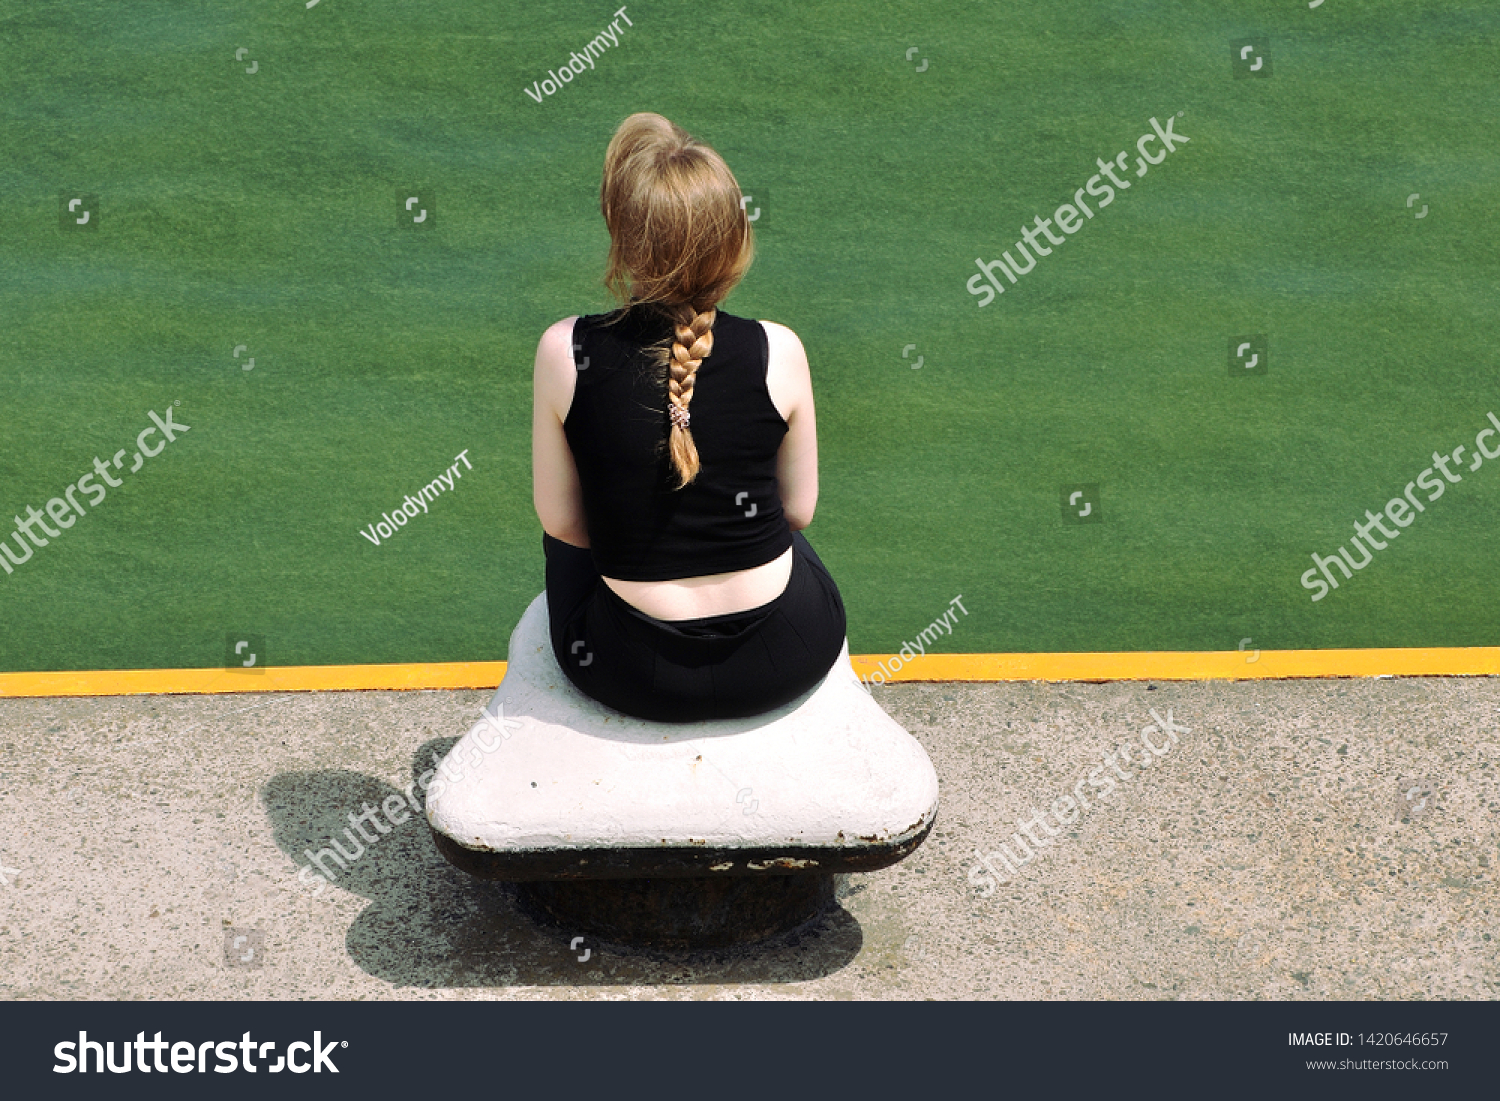 The girl sits on the bollard of sea berth and observes sea flowering which is coloured green #1420646657